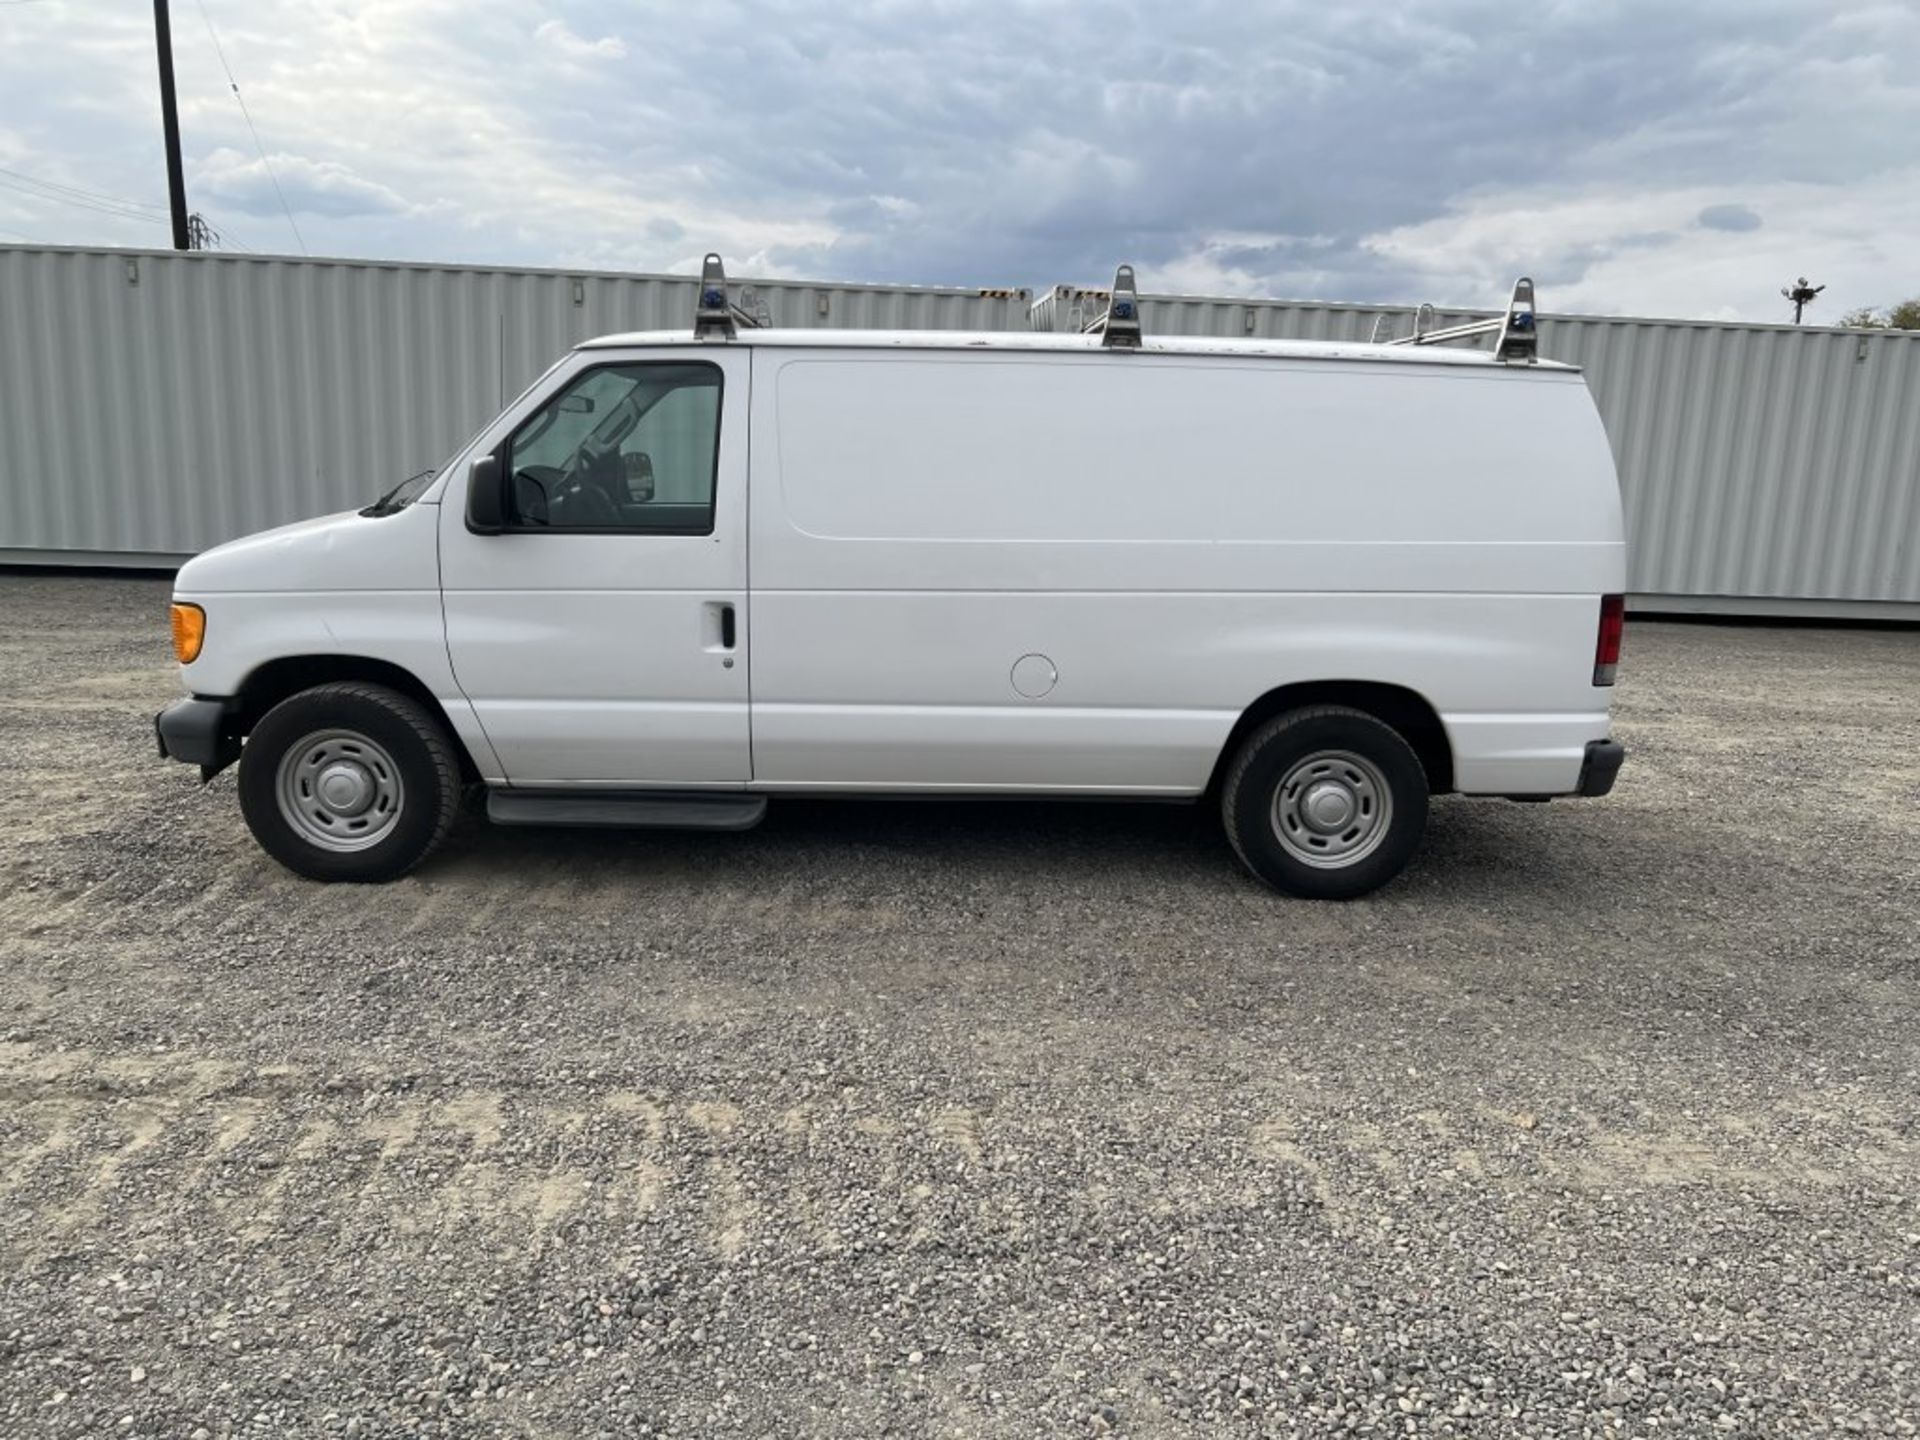 2006 Ford E150 Cargo Van - Image 7 of 21